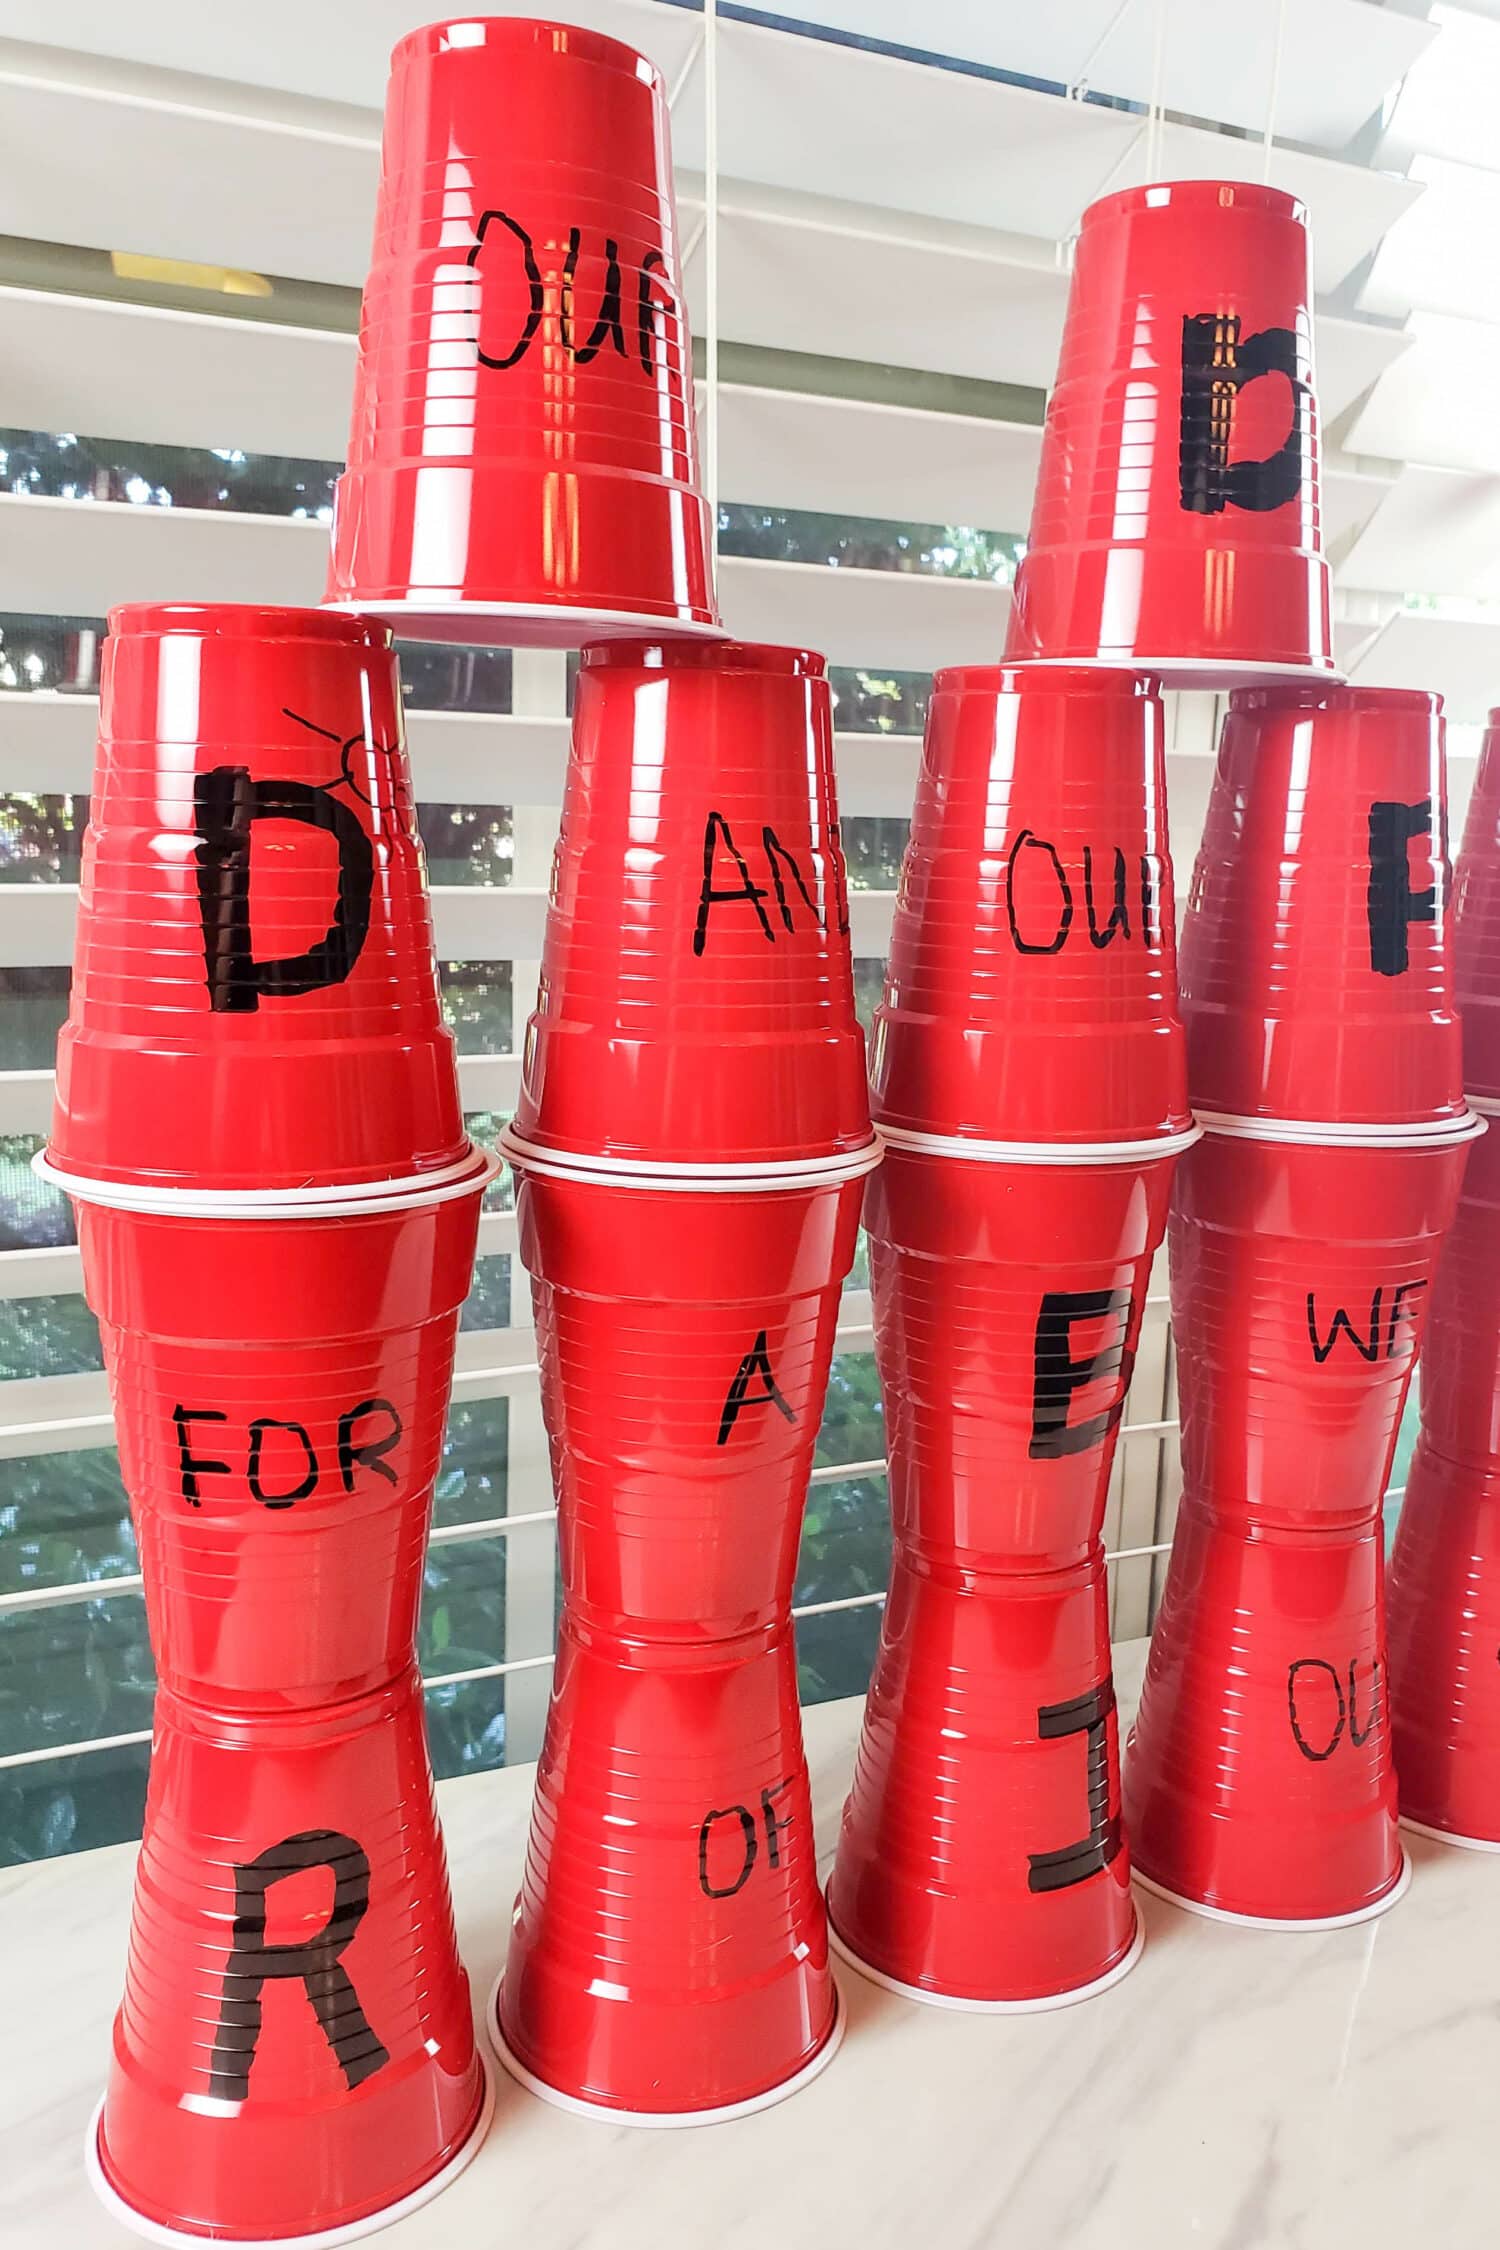 Redeemer of Israel Cup Stacking singing time ideas for LDS Primary Music Leaders. The kids will absolutely love stacking cups in a tall castle wall or pyramid as they learn this beloved Hymn with a crack the code hidden in!